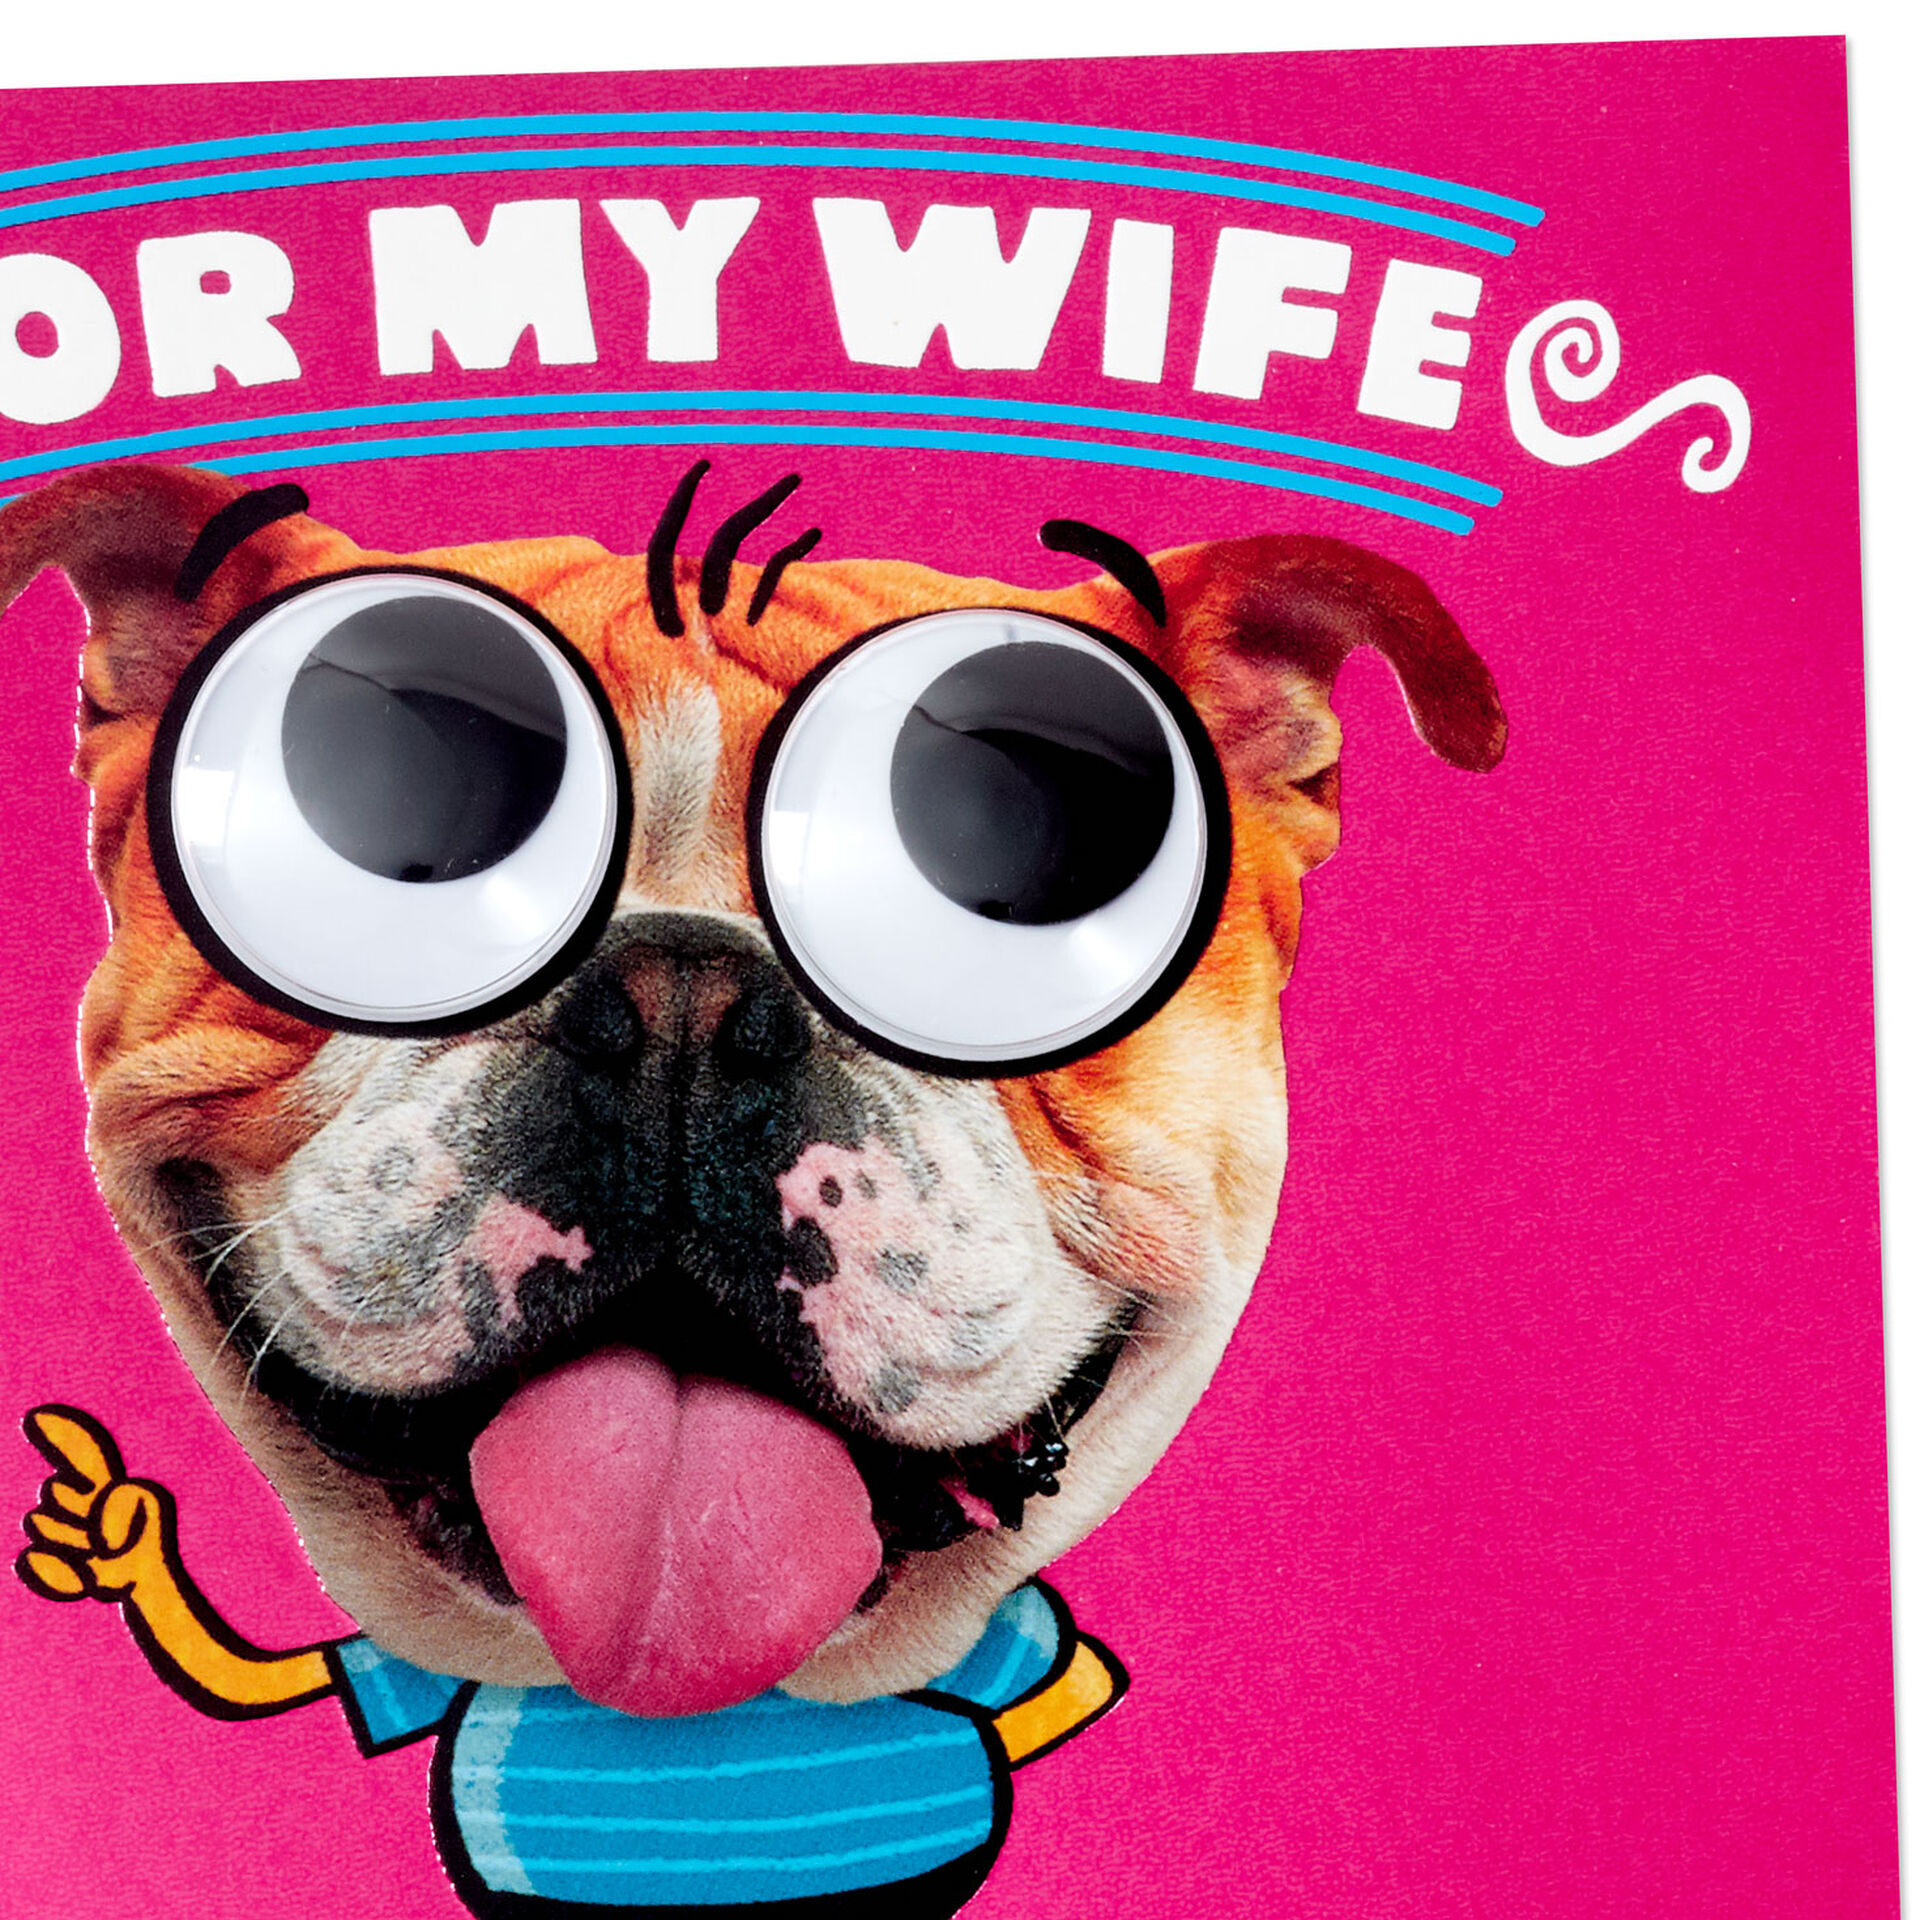 Details about  / Funny Happy Mother/'s Day Hot Wife Google Eyed Puppy Dog Hallmark Greeting Card